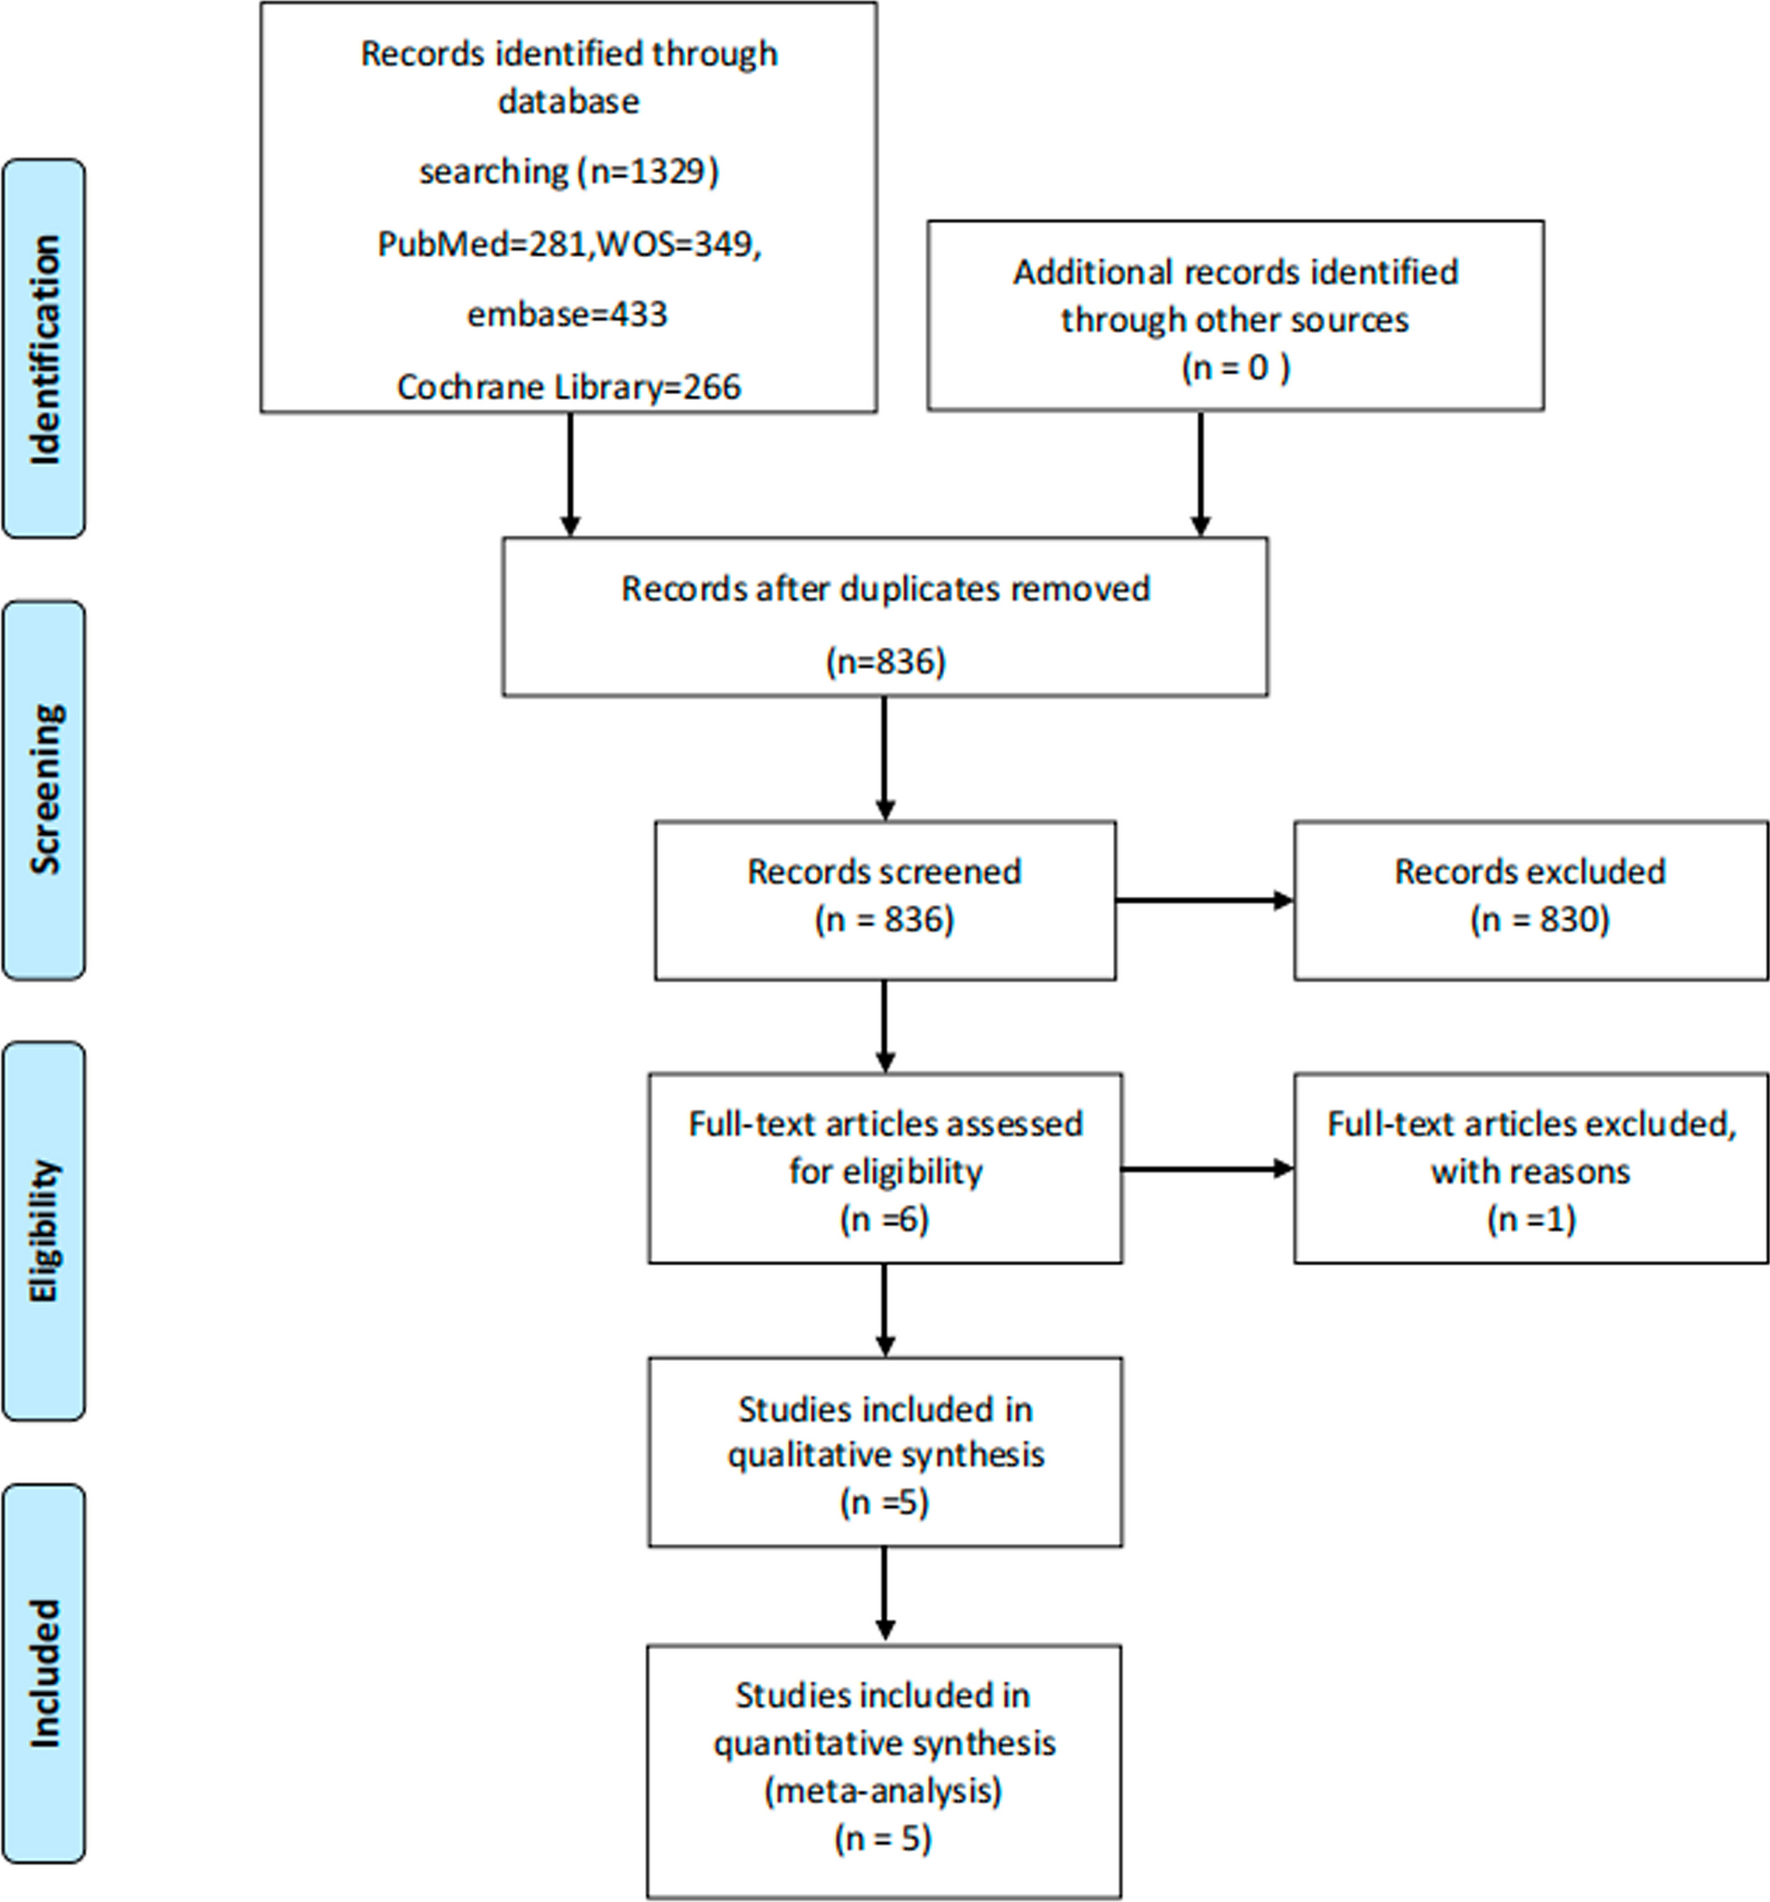 The efficacy of pericapsular nerve group block for reducing pain and opioid consumption after total hip arthroplasty: a systematic review and meta-analysis